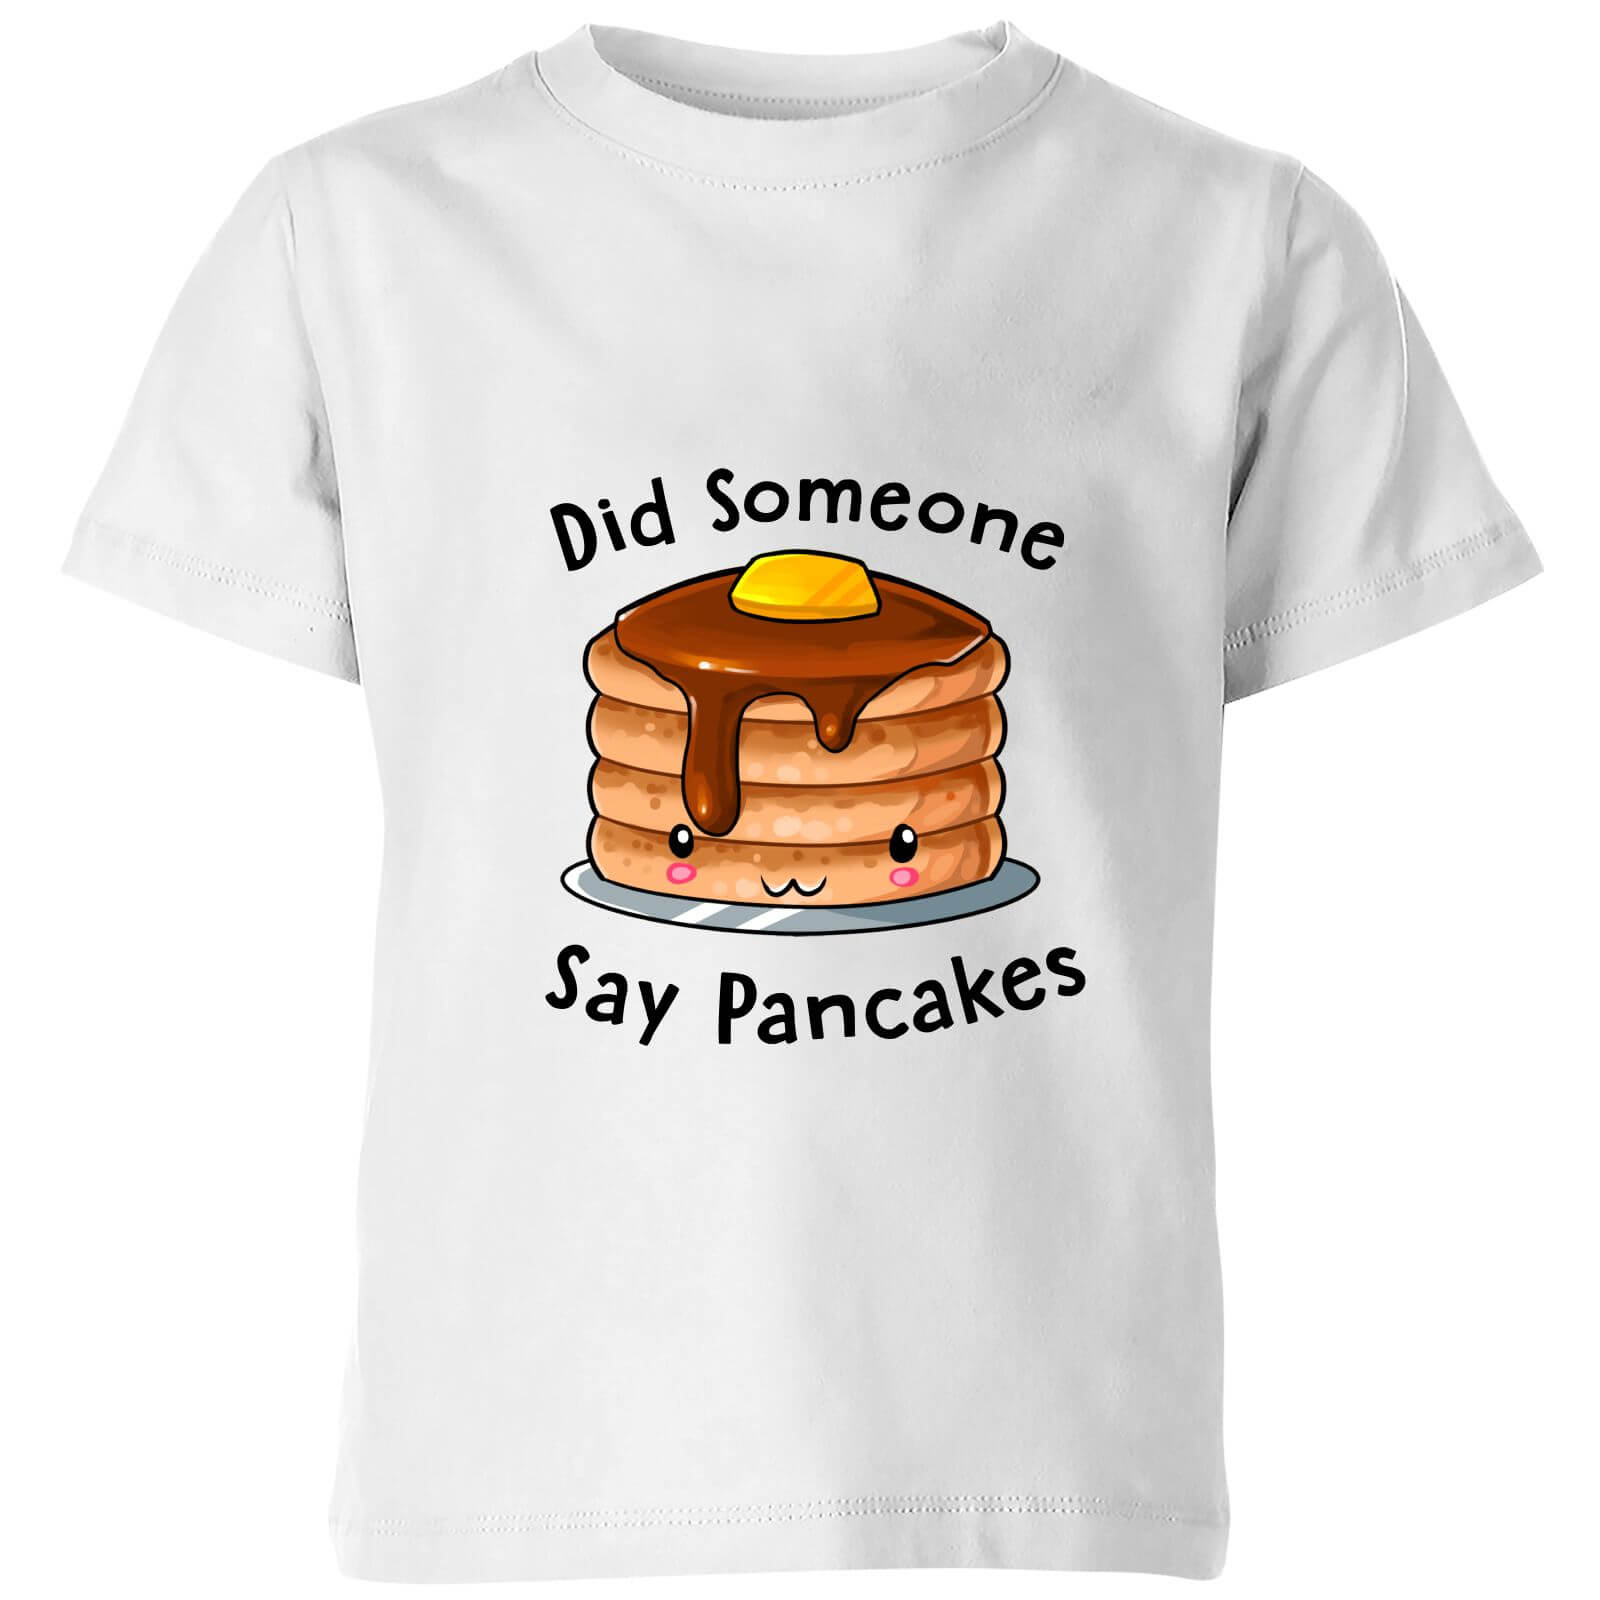 My Little Rascal Did Someone Say Pancakes Kids' T-Shirt - White - 3-4 Years - White